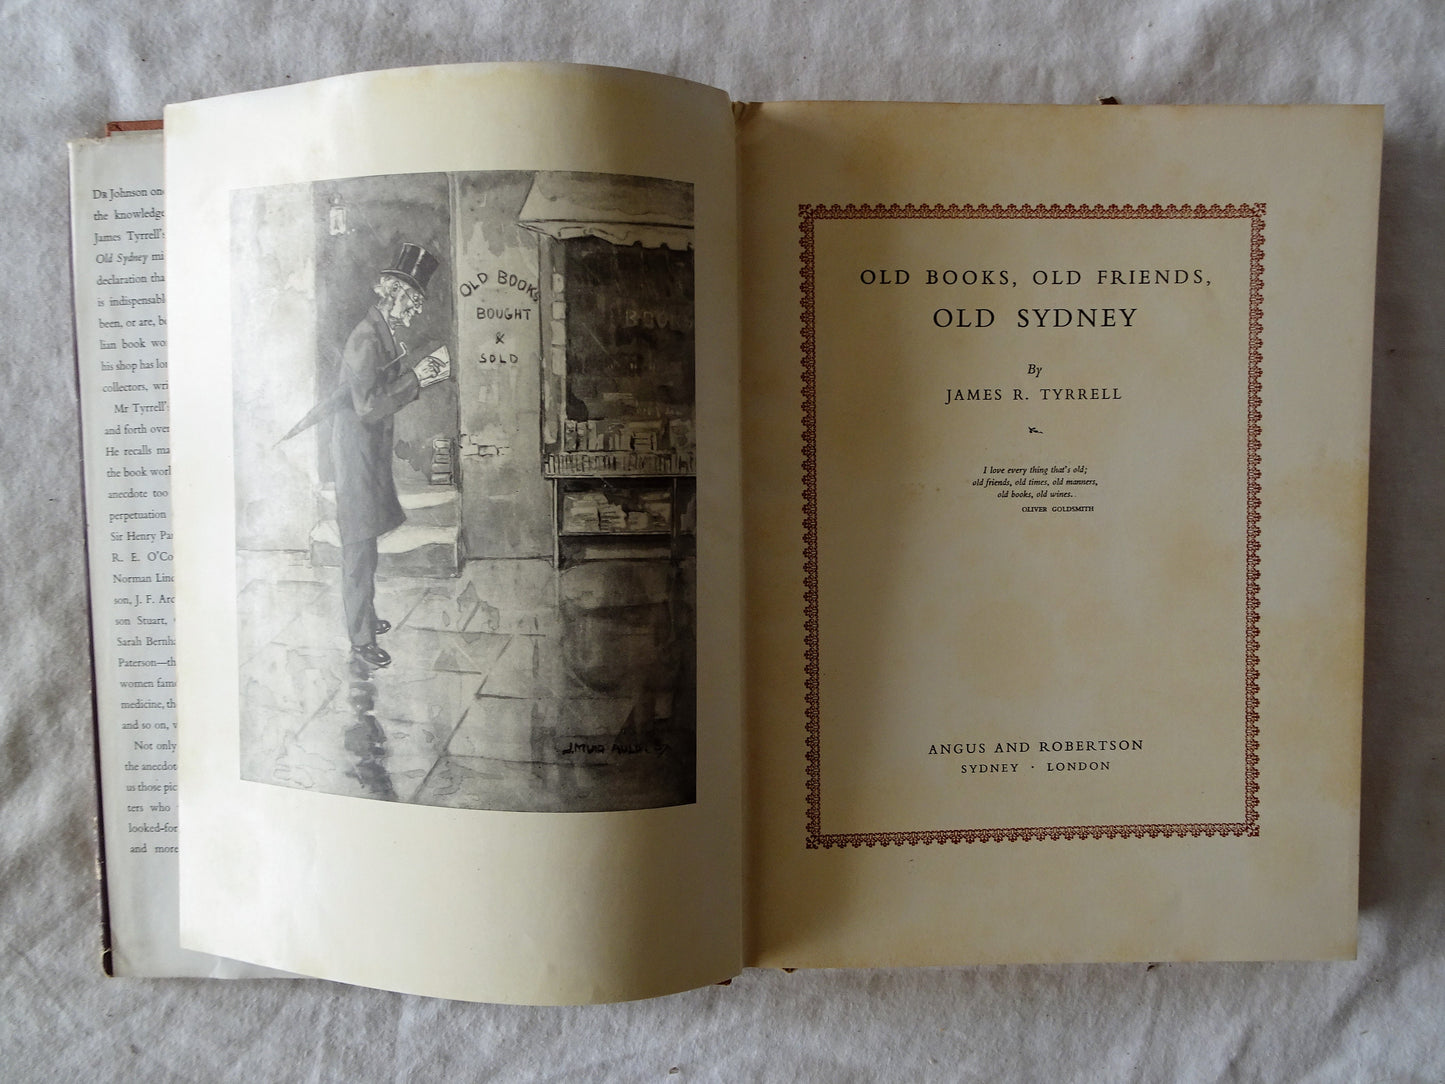 Old Books, Old Friends, Old Sydney by James R. Tyrrell